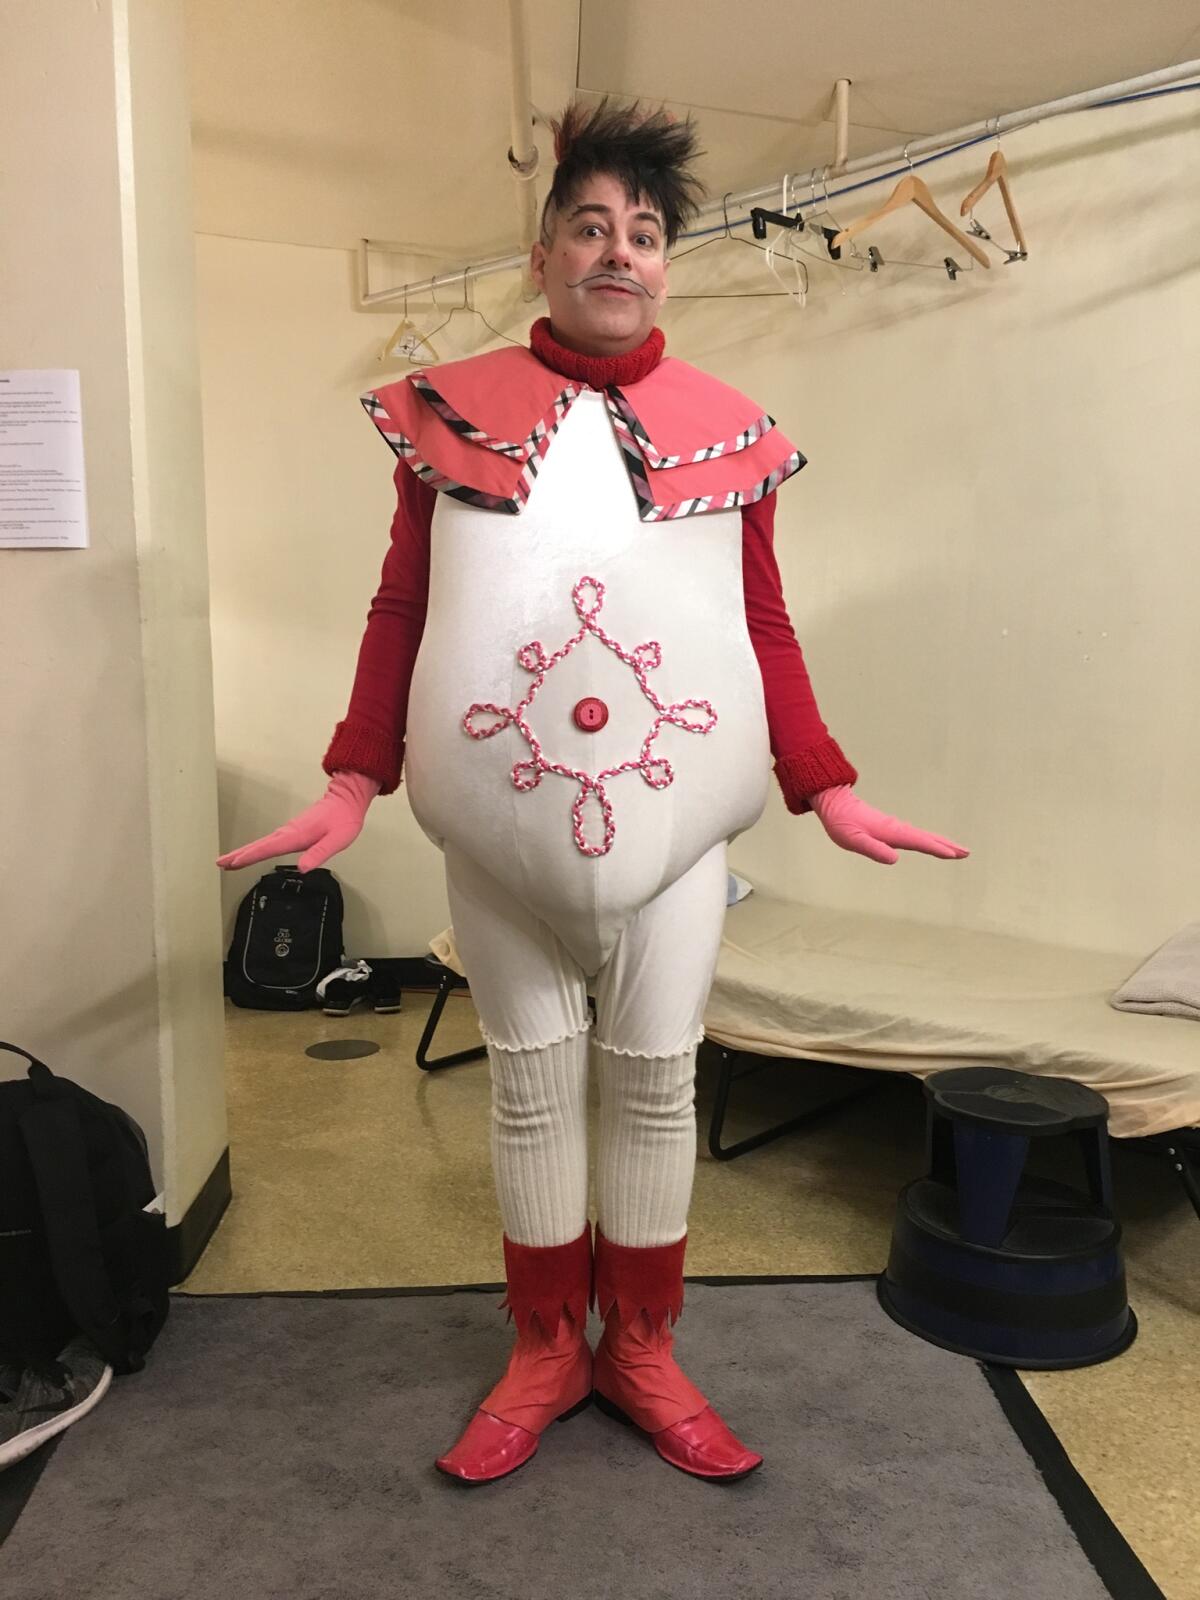 James Vásquez costumes as Whoville resident Salvador in "Dr. Seuss's How the Grinch Stole Christmas!" at the Old Globe.